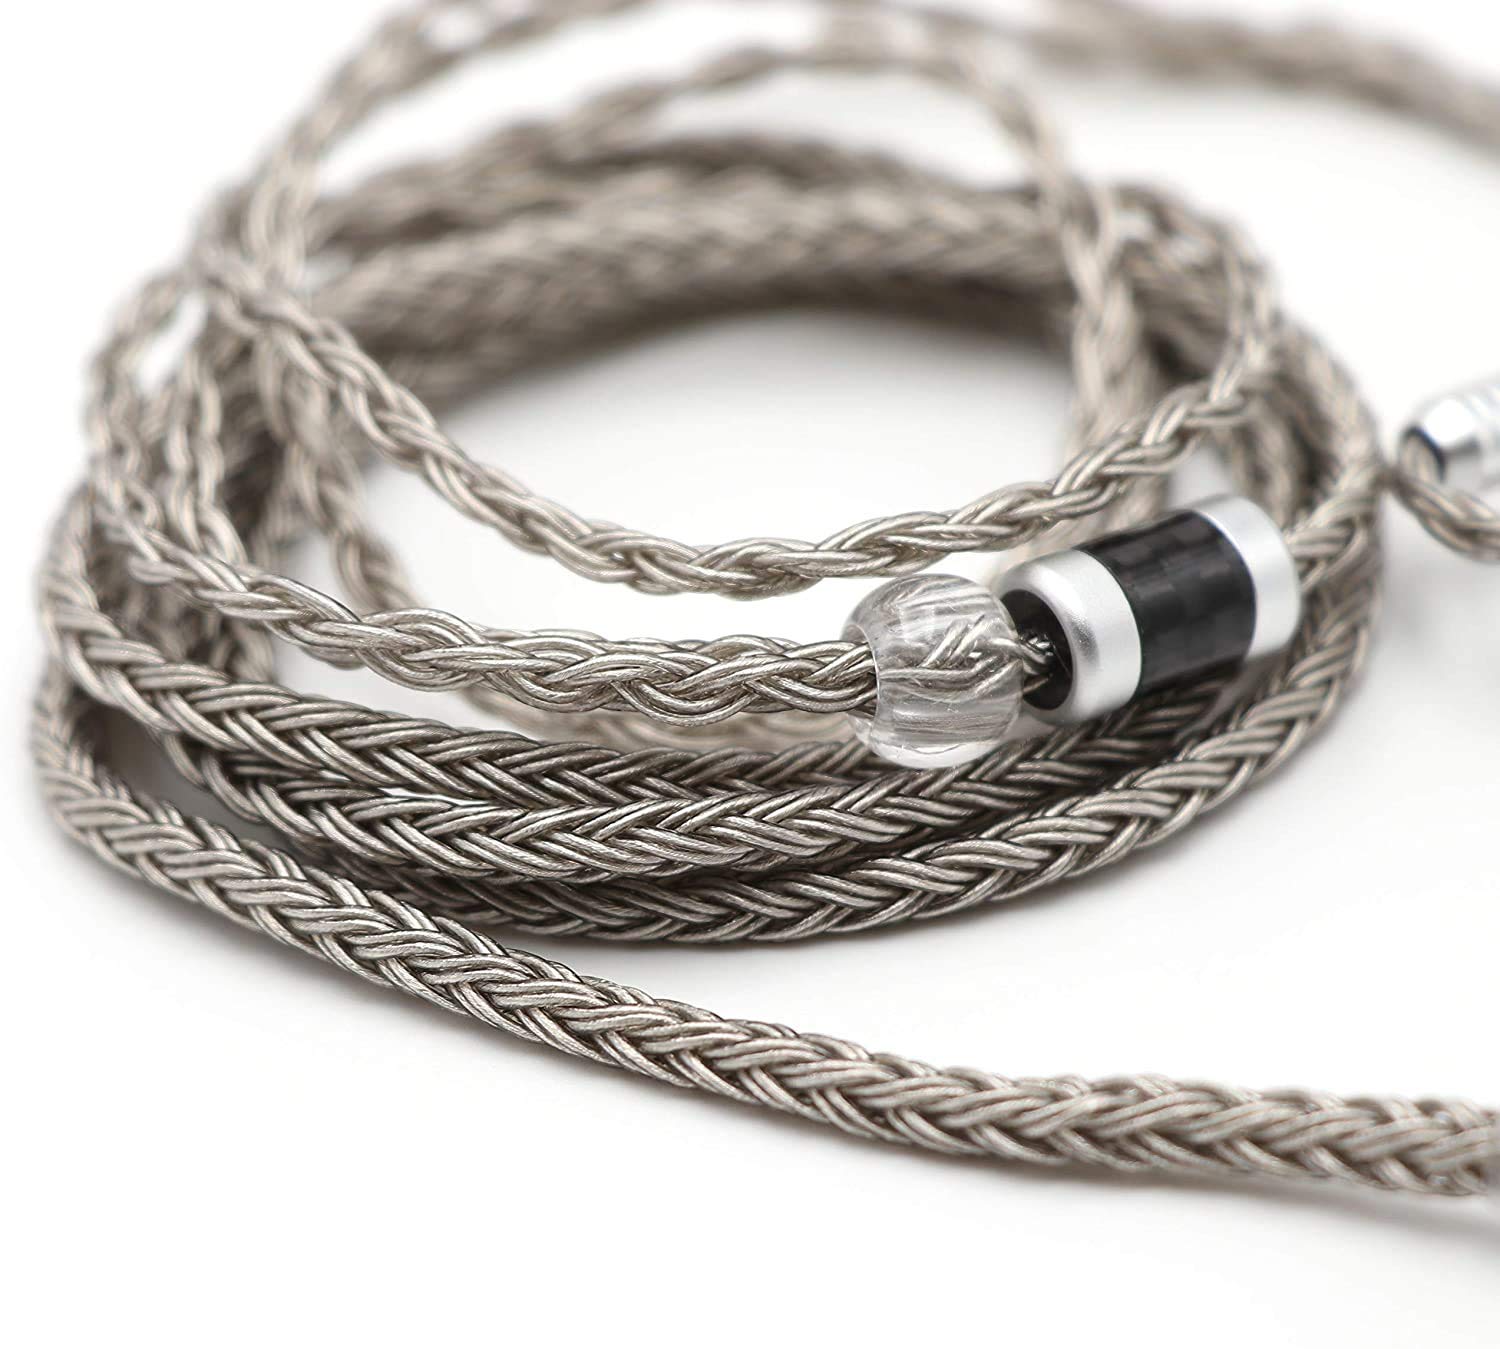 Linsoul Tripowin Zonie 16 Core Silver Plated Cable SPC [...]